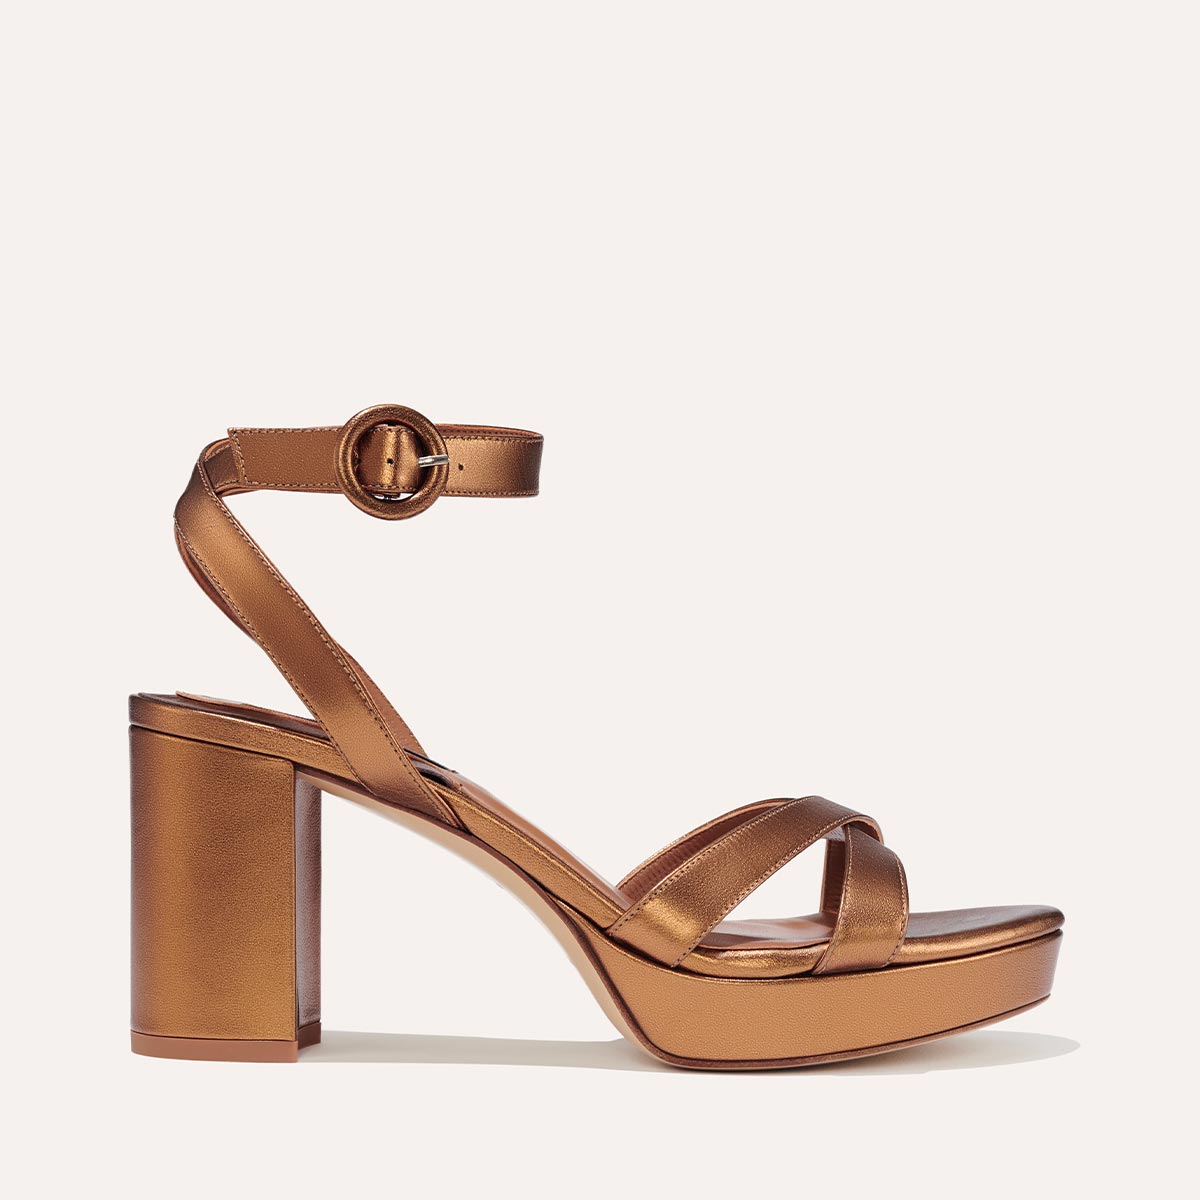 Margaux's classic and comfortable Platform Sandal in bronze metallic nappa leather with crossed straps and a walkable block heel